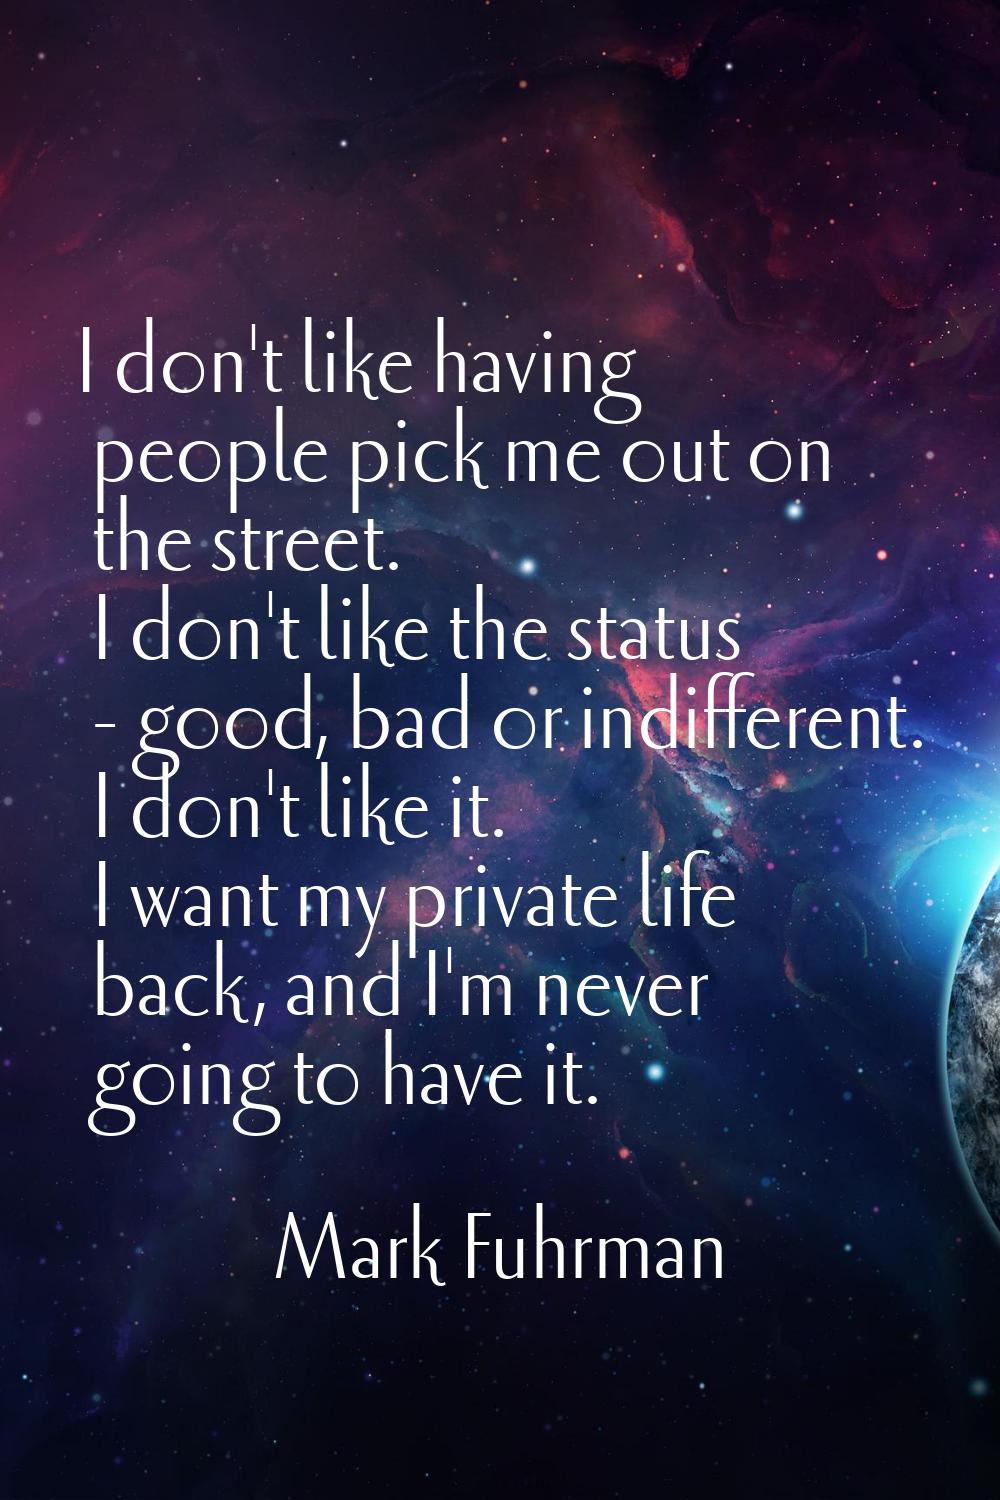 I don't like having people pick me out on the street. I don't like the status - good, bad or indiff